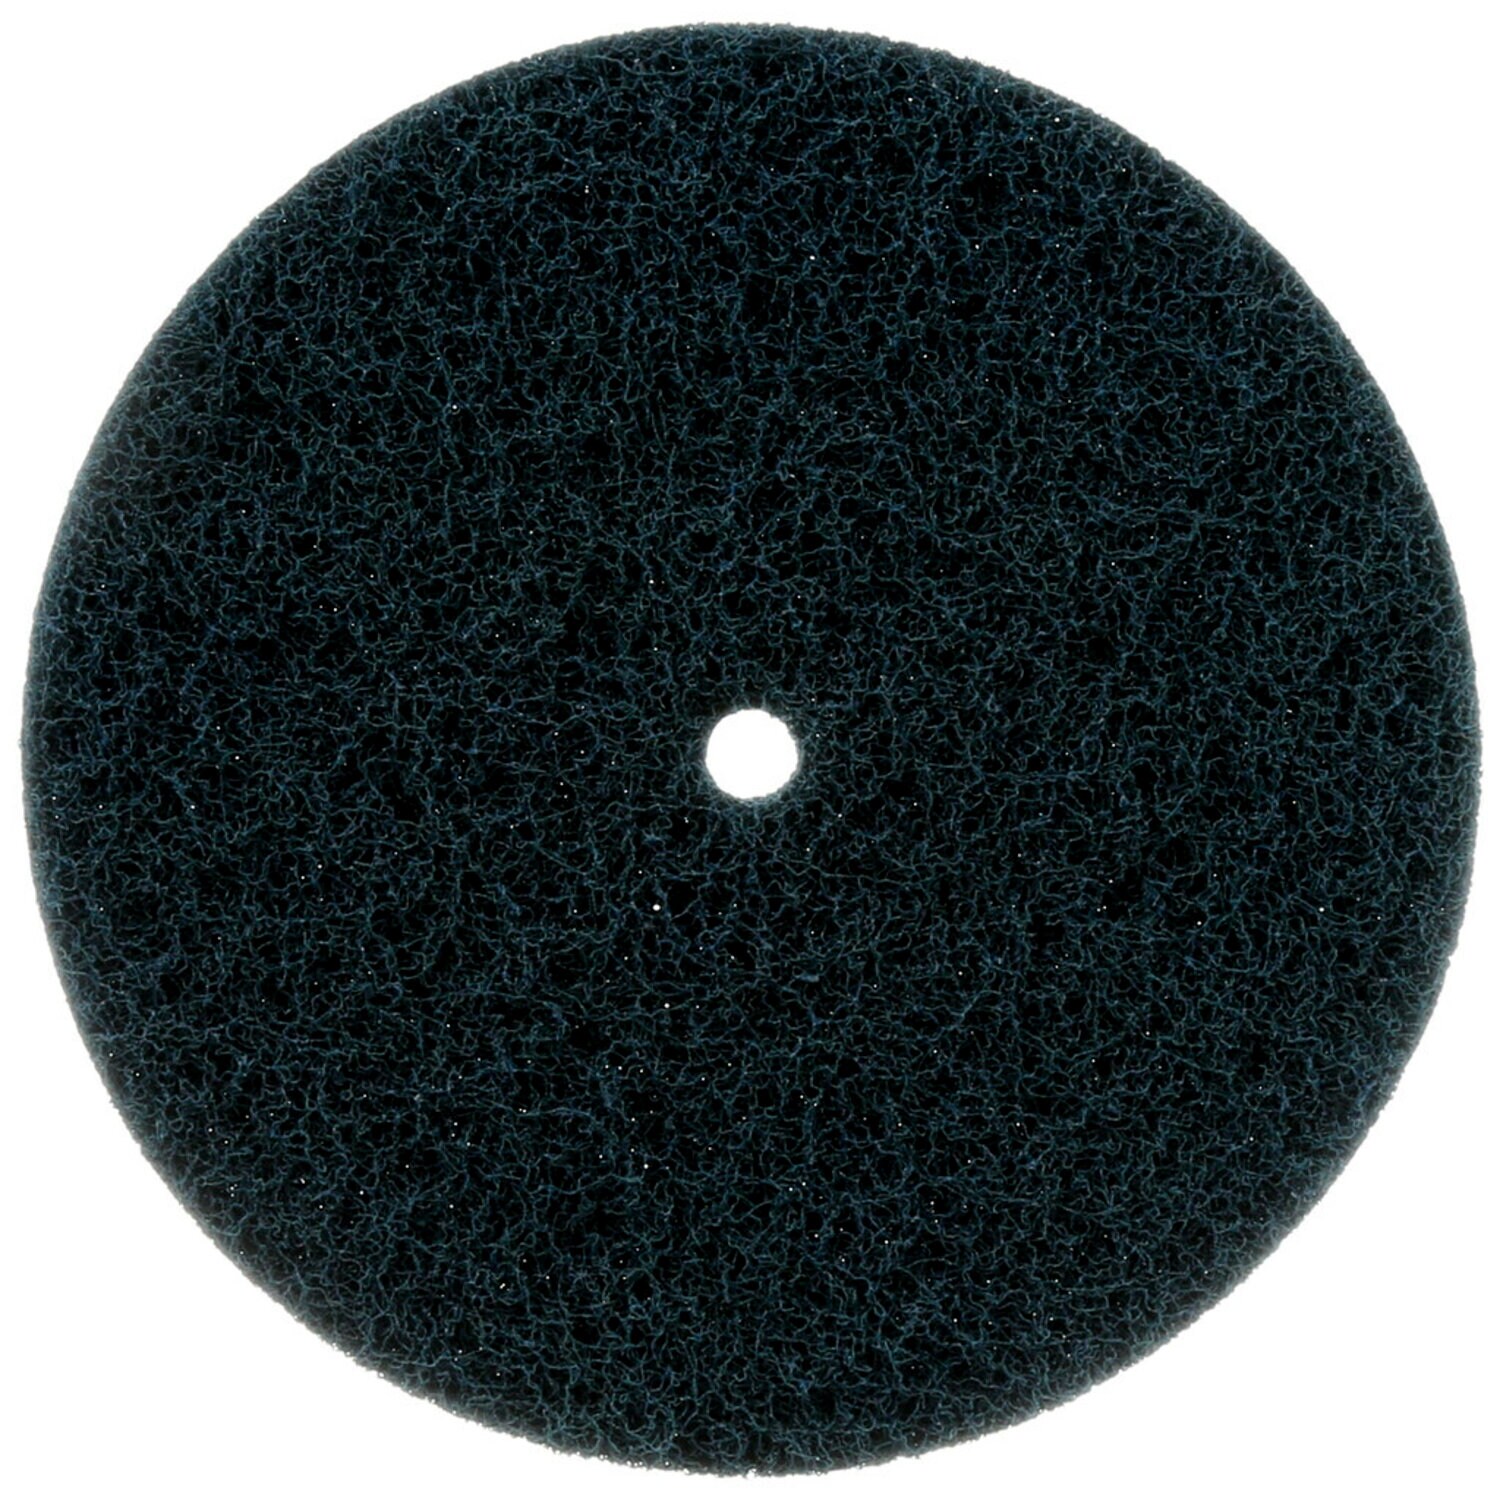 7010368537 - Standard Abrasives Buff and Blend HS Disc, 810110, 10 in x 1/2 in A
MED, 10/Pac, 100 ea/Case